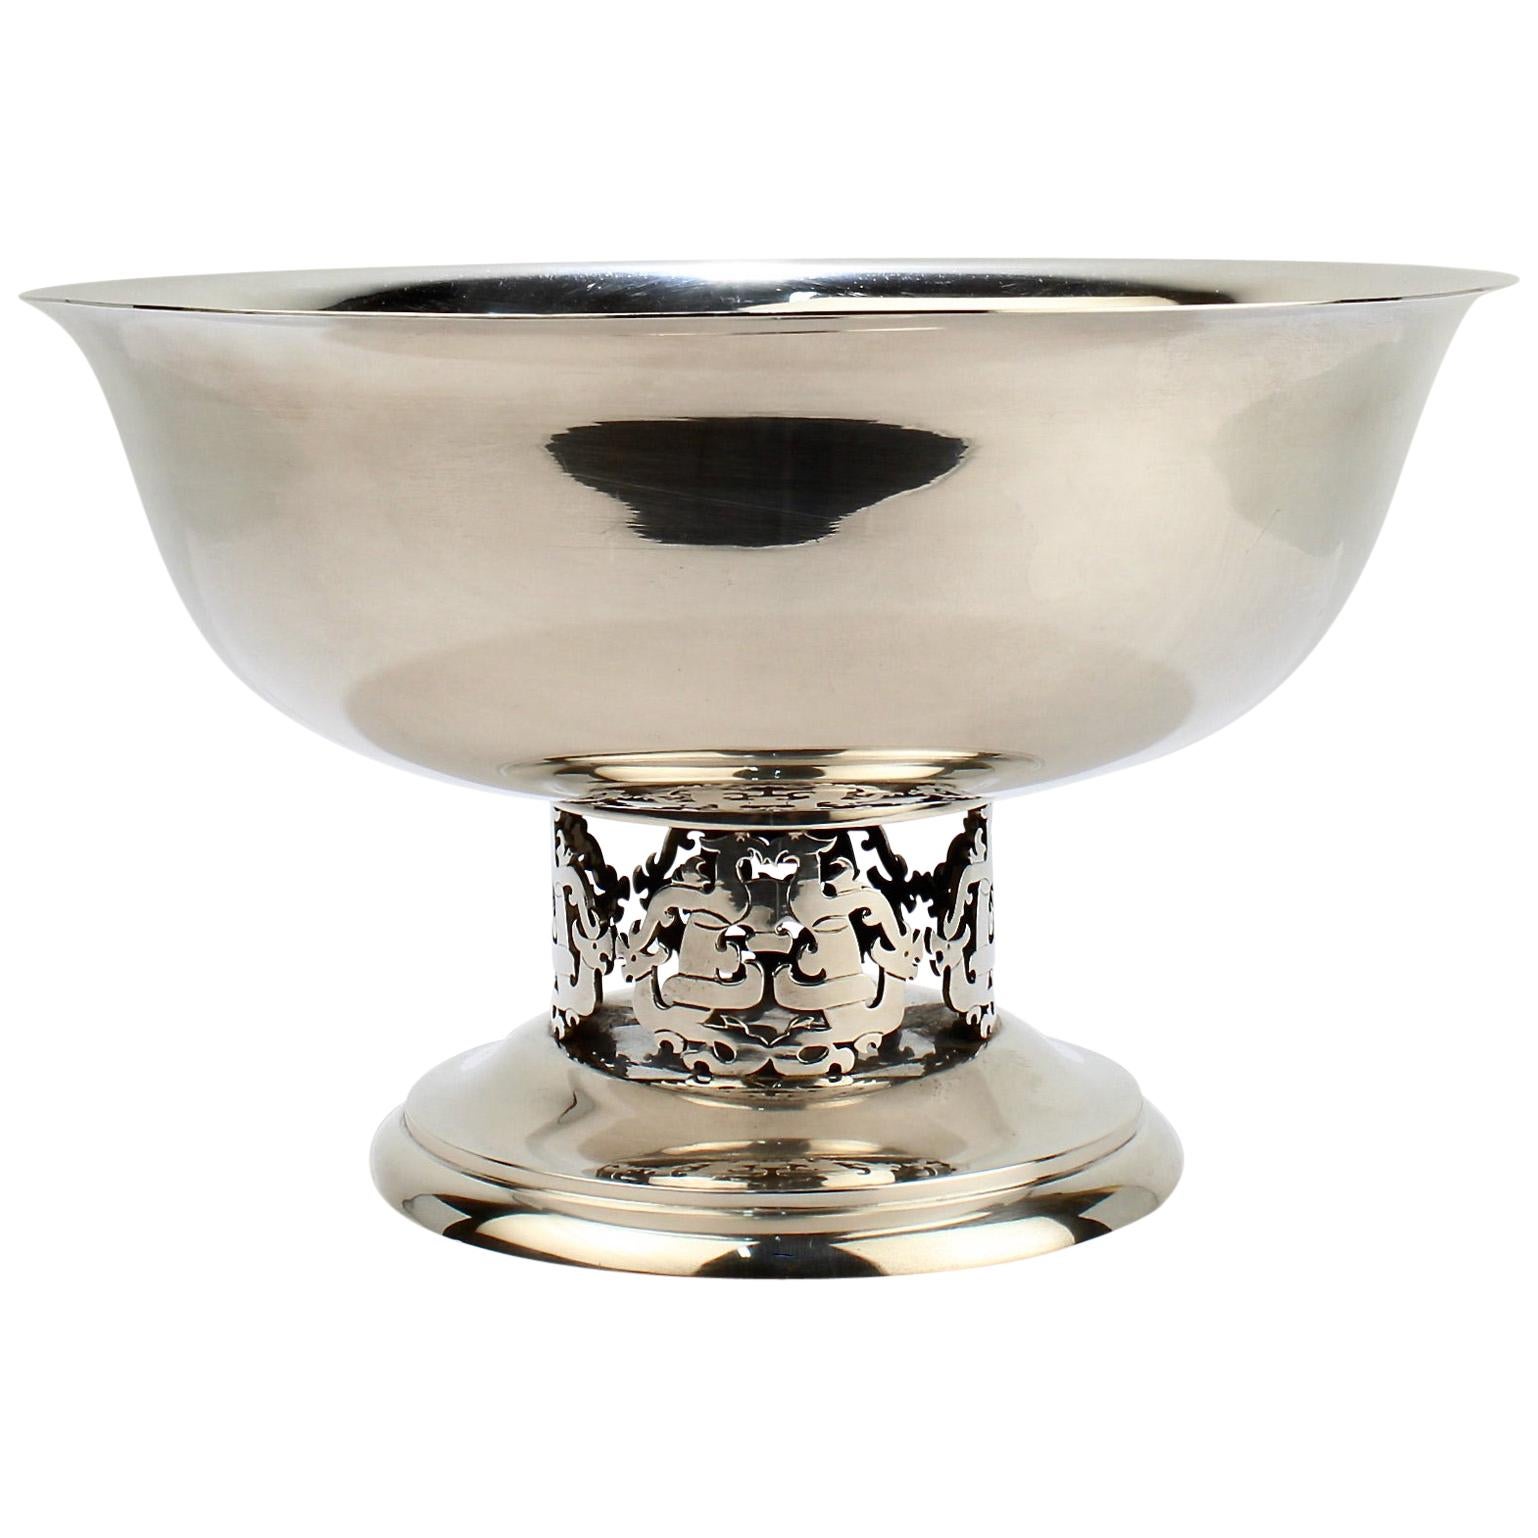 Large Allan Adler Mid-Century Modern Chinese Style Sterling Silver Punch Bowl